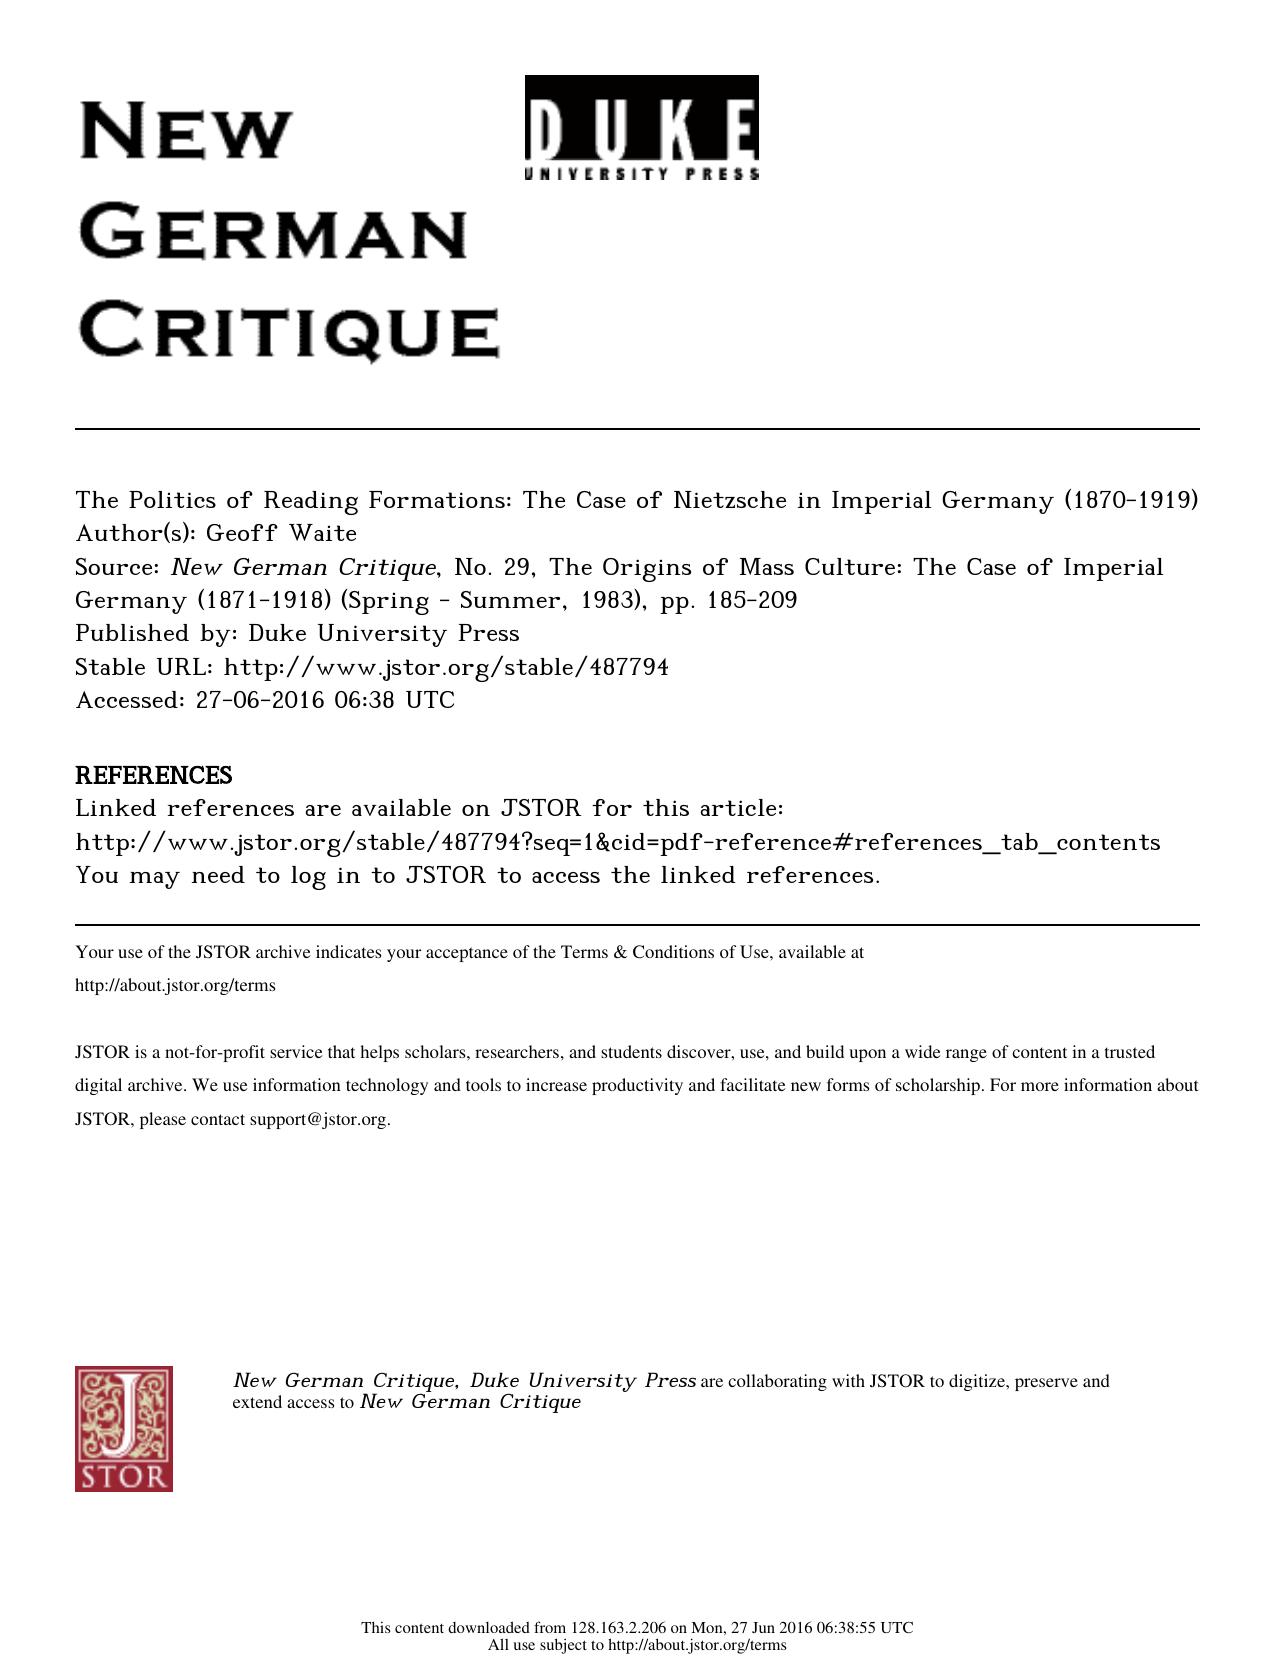 The Politics of Reading Formations: The Case of Nietzsche in Imperial Germany (1870-1919)